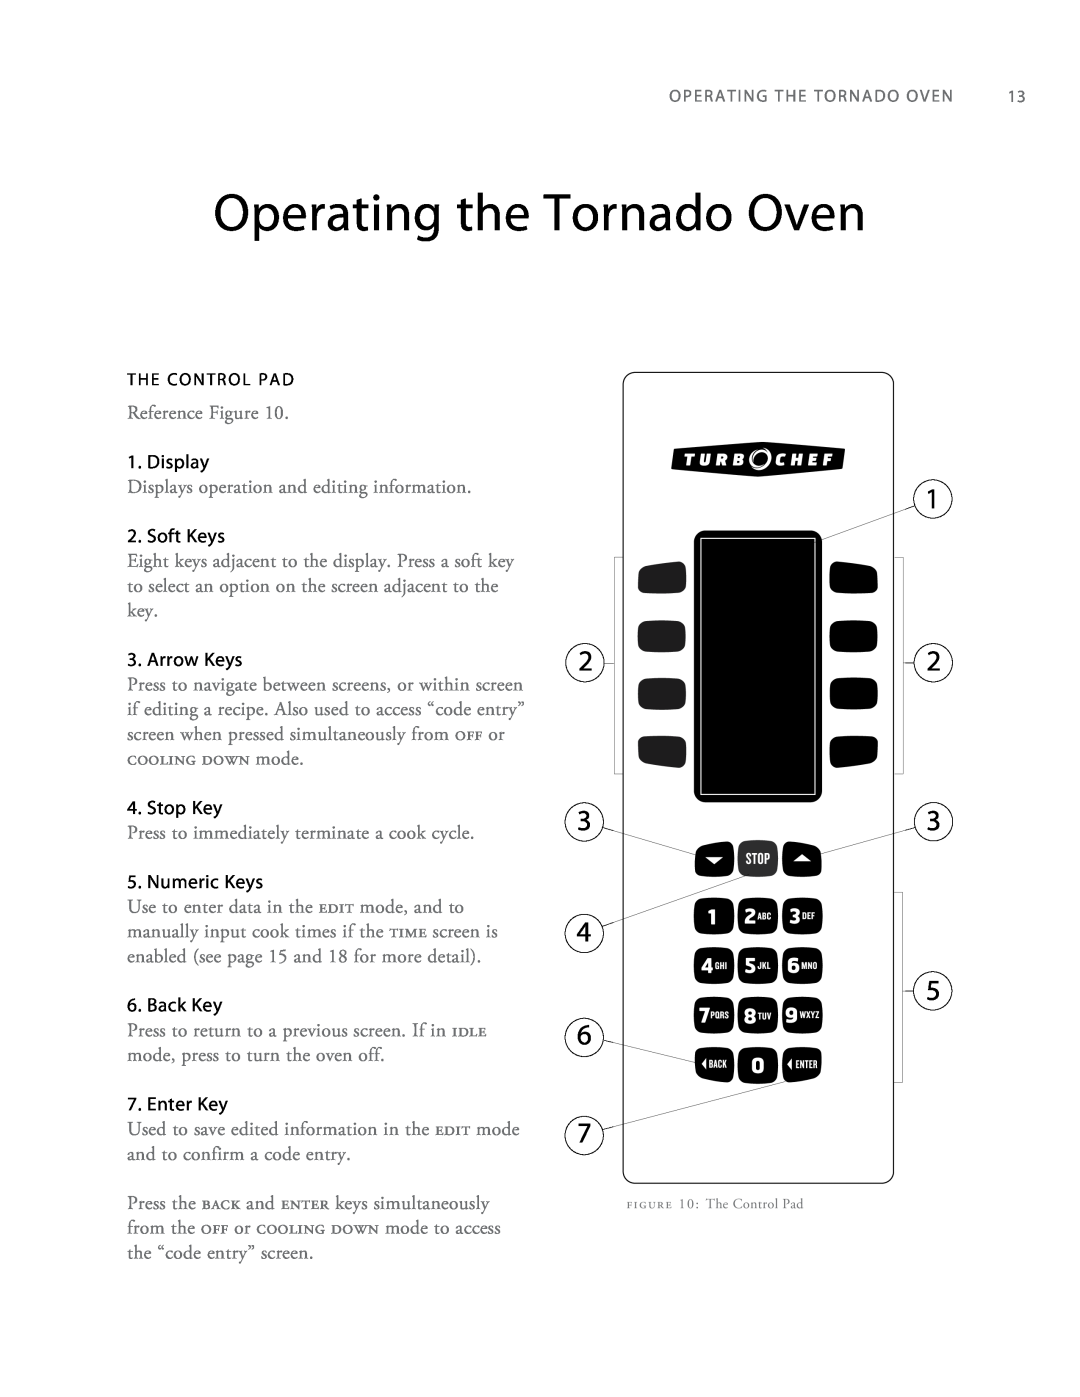 Turbo Chef Technologies Tornado 2 owner manual Operating the Tornado Oven 